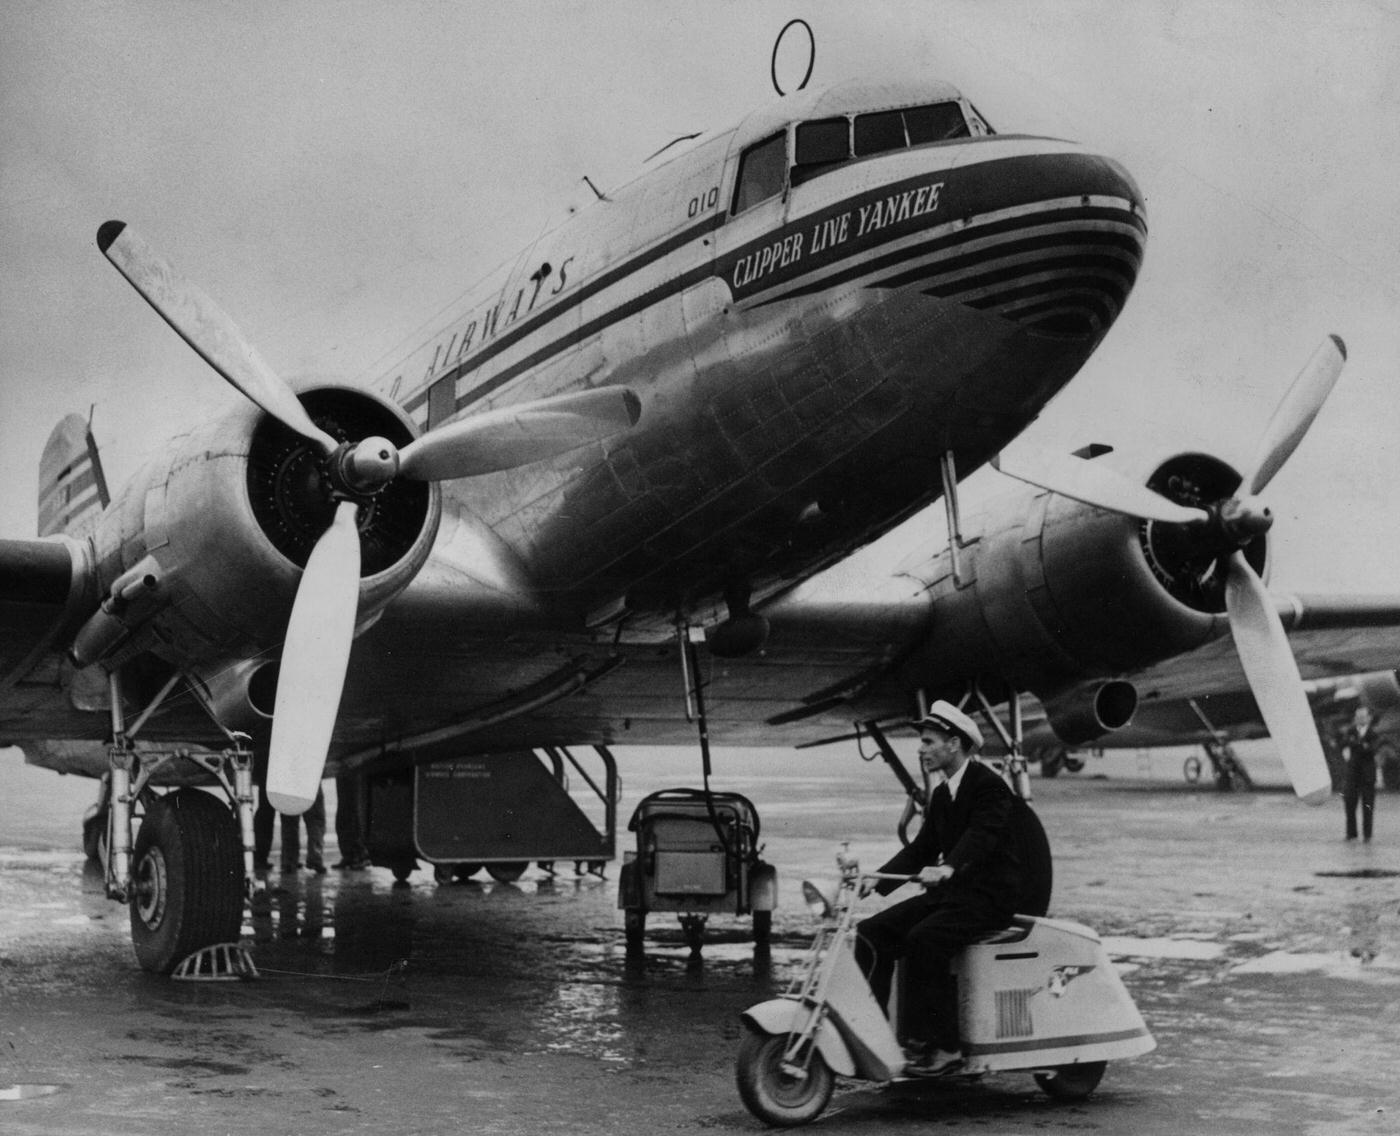 A motor-tricycle 'scooter' is being used for quick communication between airport buildings and planes at London Airport (Heathrow). One of the planes on the tarmac is a Pan-Am Clipper Line Yankee.